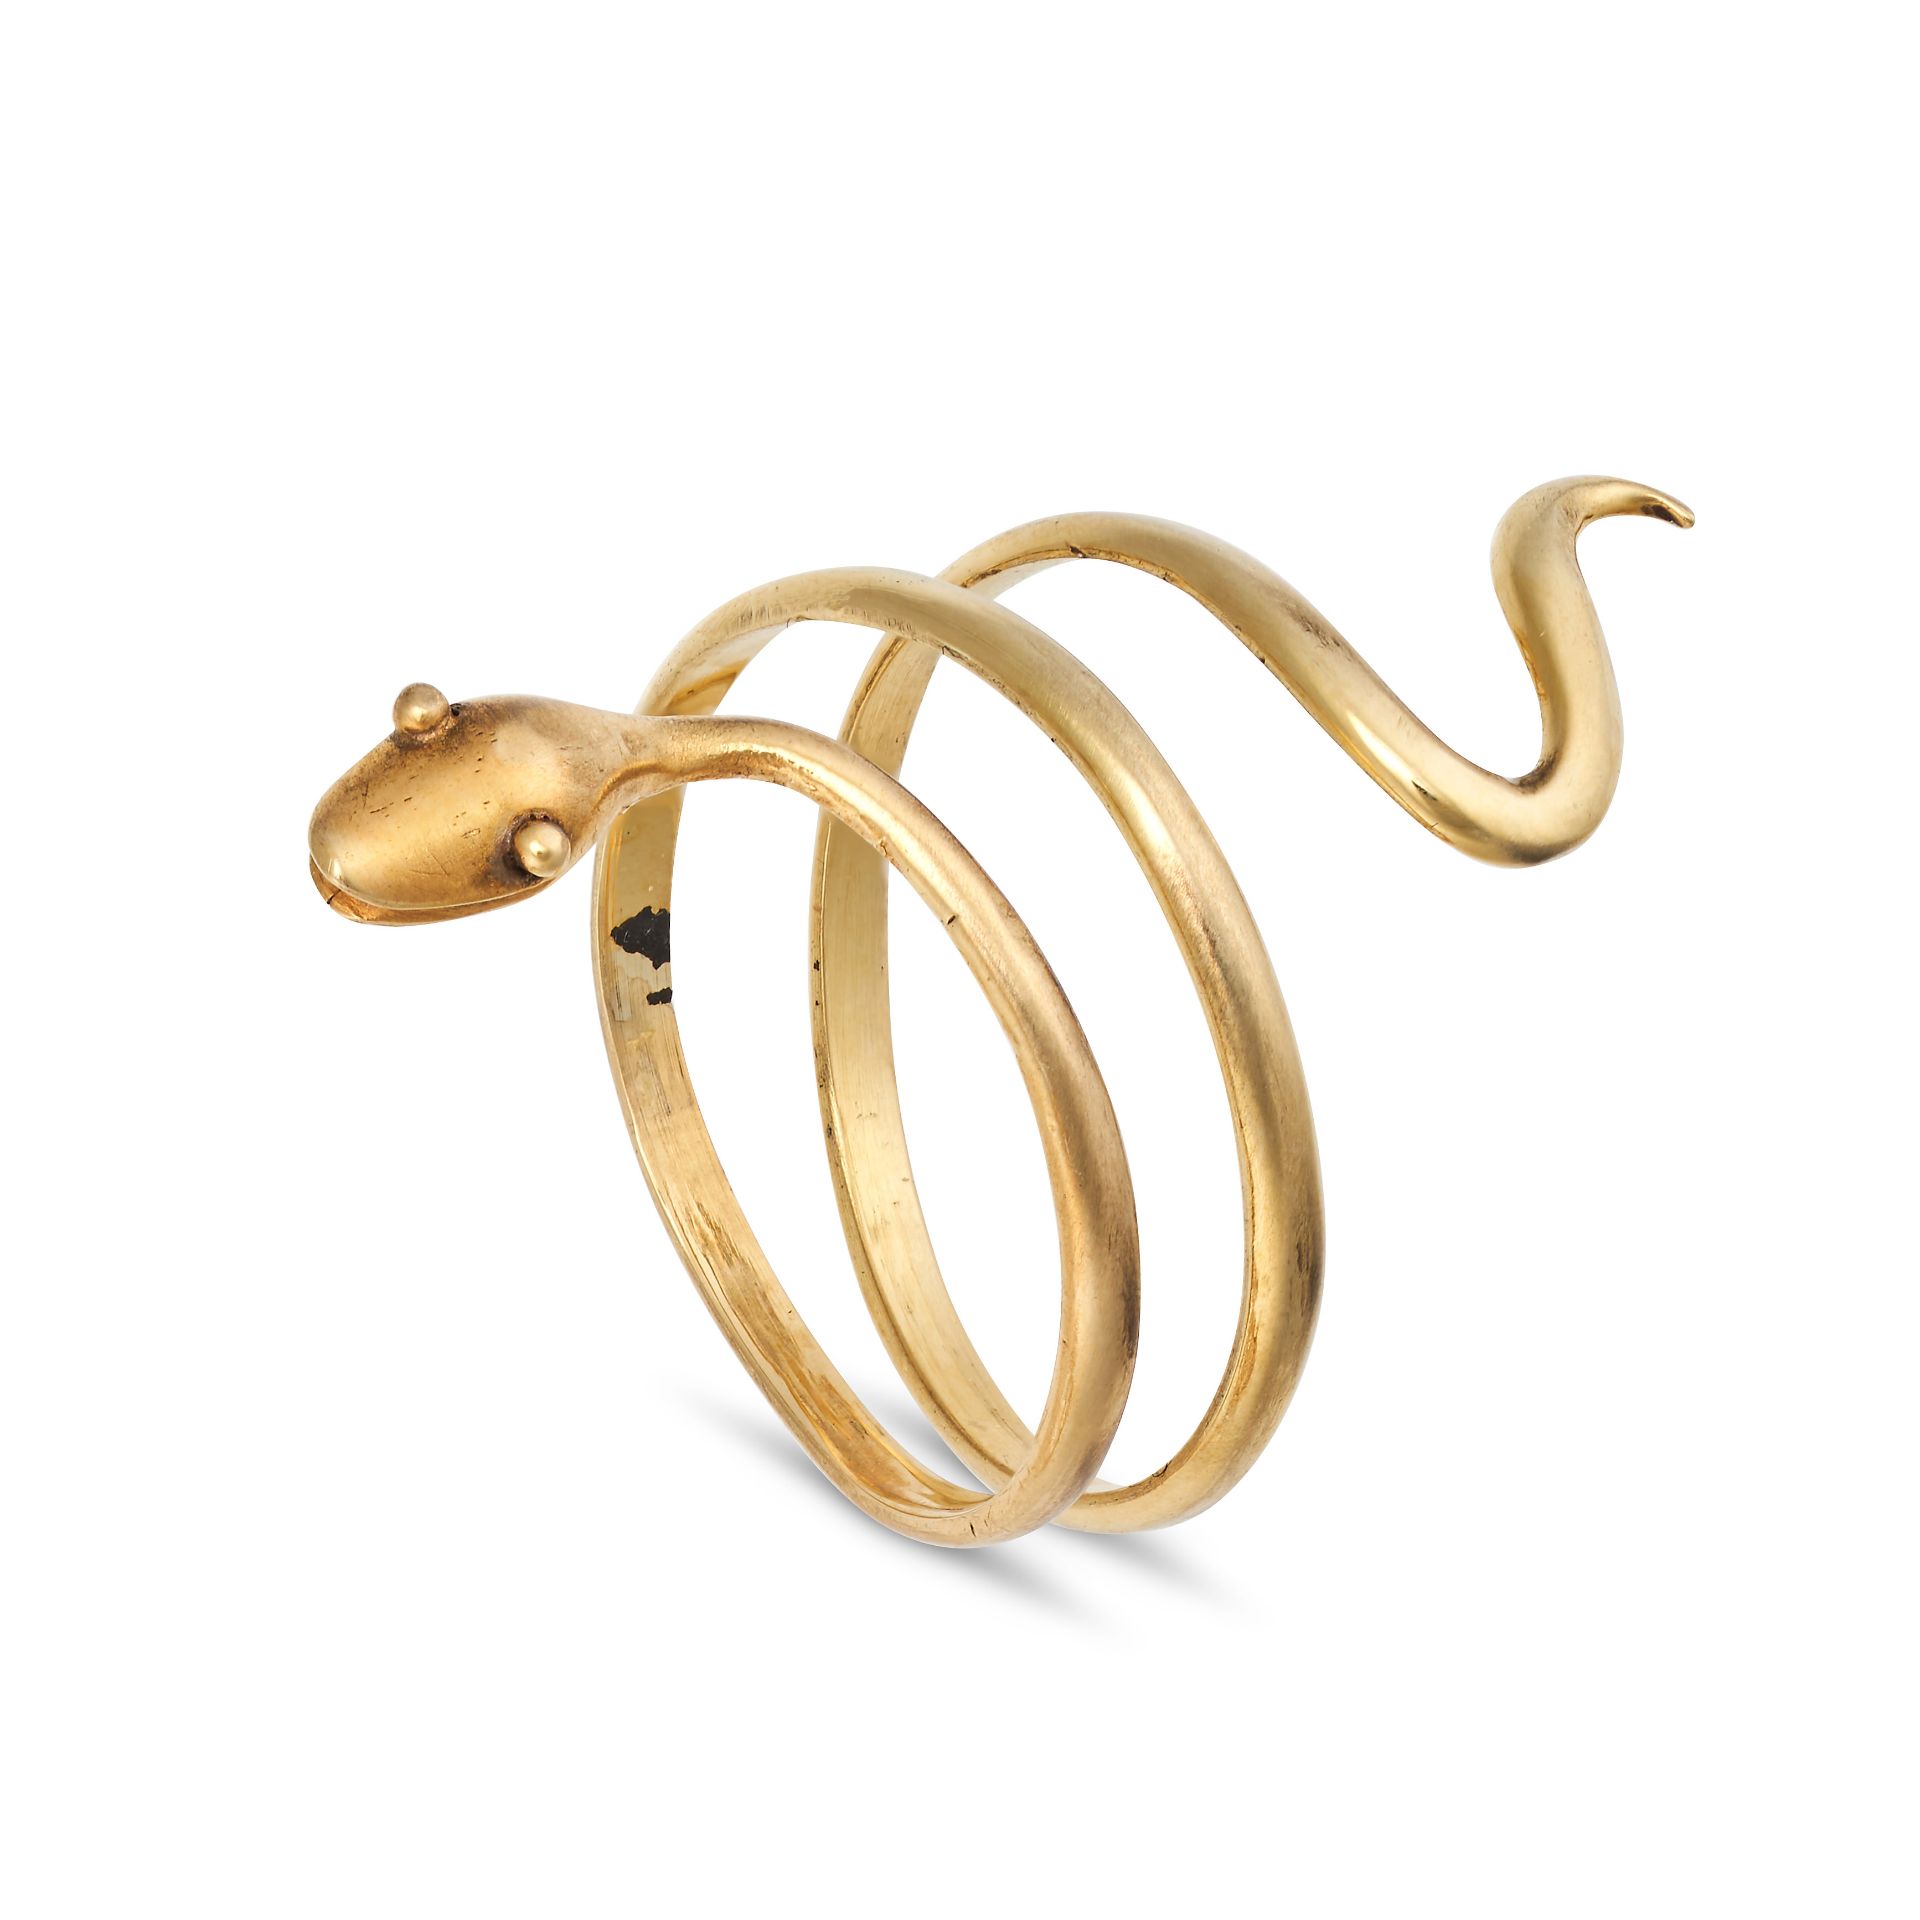 A GOLD SNAKE RING in yellow gold, designed as a coiled snake, no assay marks, size M1/2 / 6.5, 2....